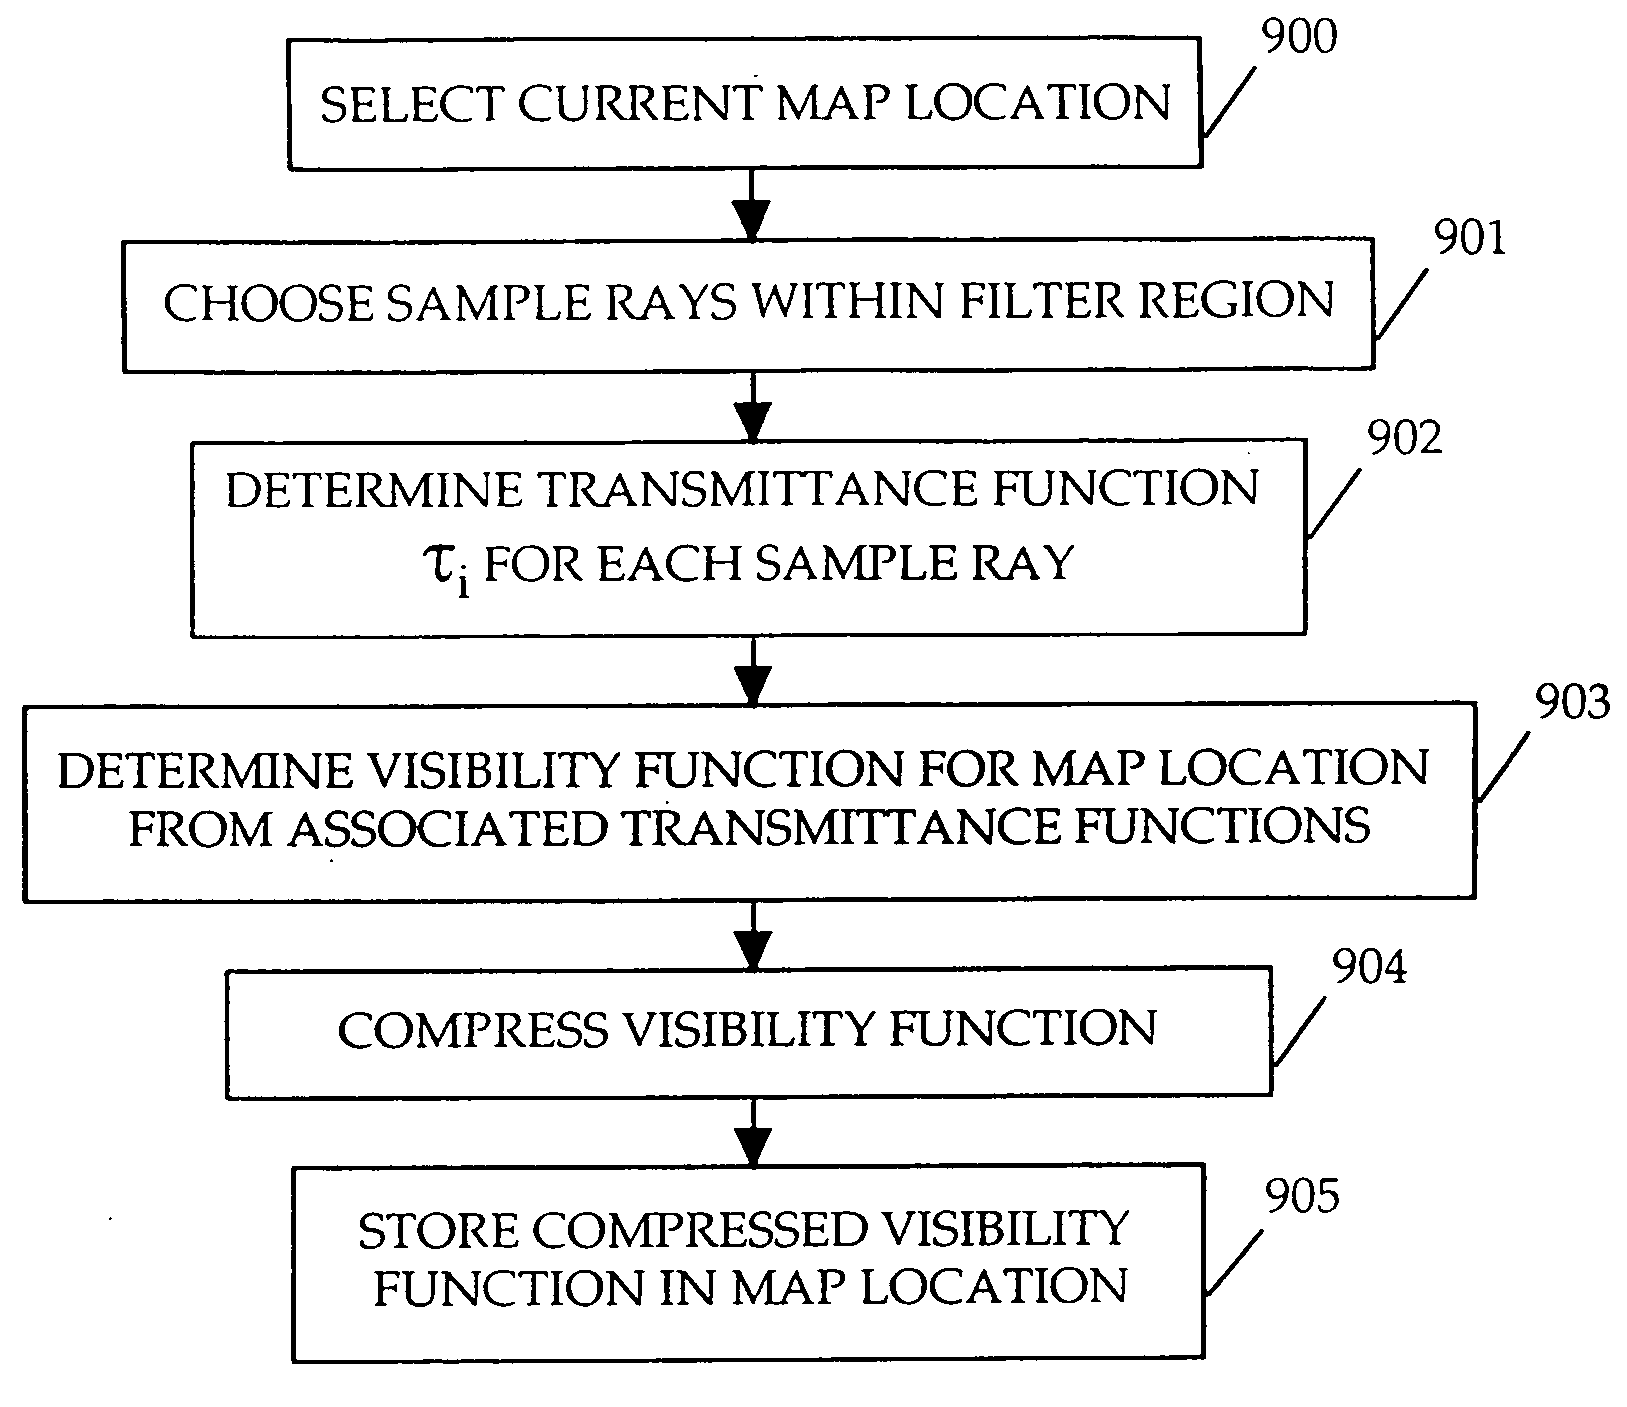 Method and apparatus for rendering shadows